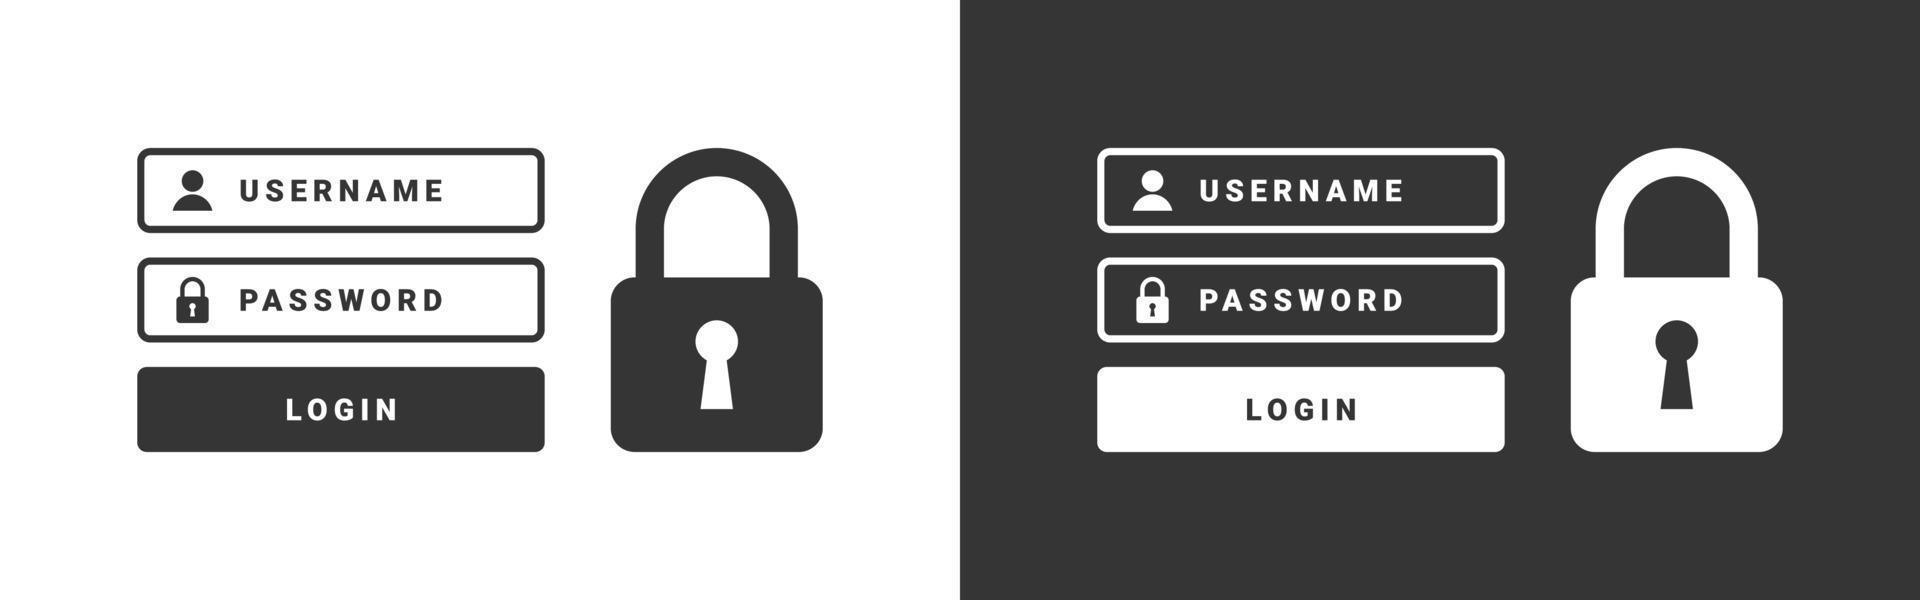 Account login form. Cybersecurity and privacy concepts to protect data.Vector illustration vector